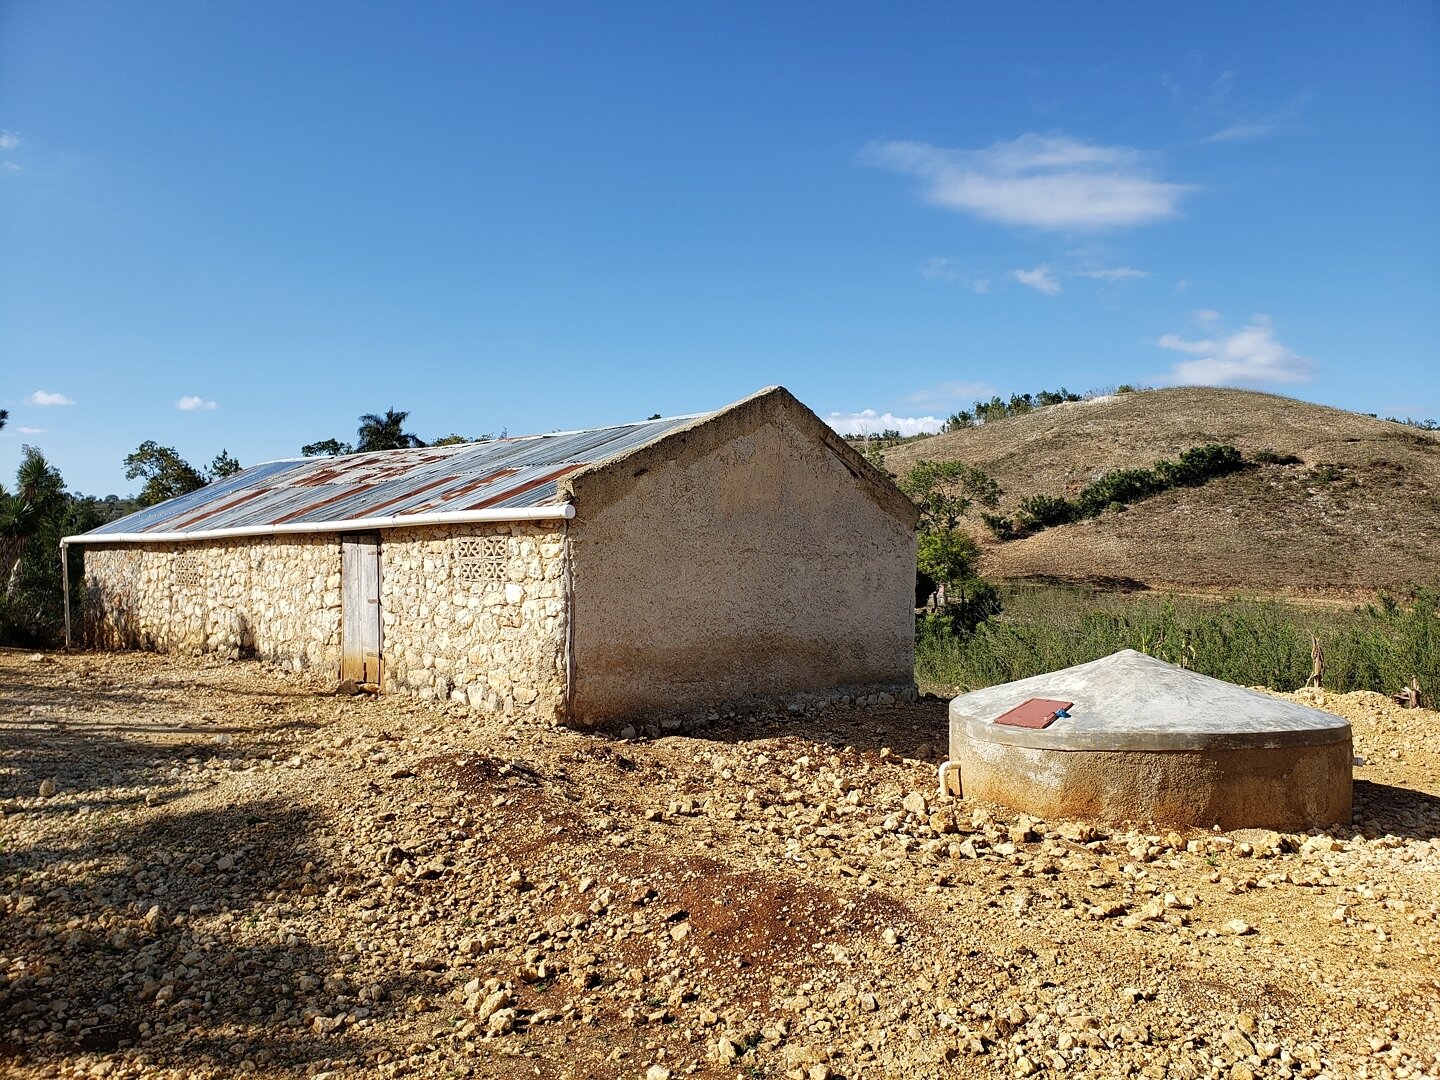 The village of Djiobel ... estimated population: 350 ... much improved access to water for all of them #bonbagay! 🇭🇹 
.
.
.
#rainwaterharvesting 
#Ayiticheri 
#Haiti
#frmwrx